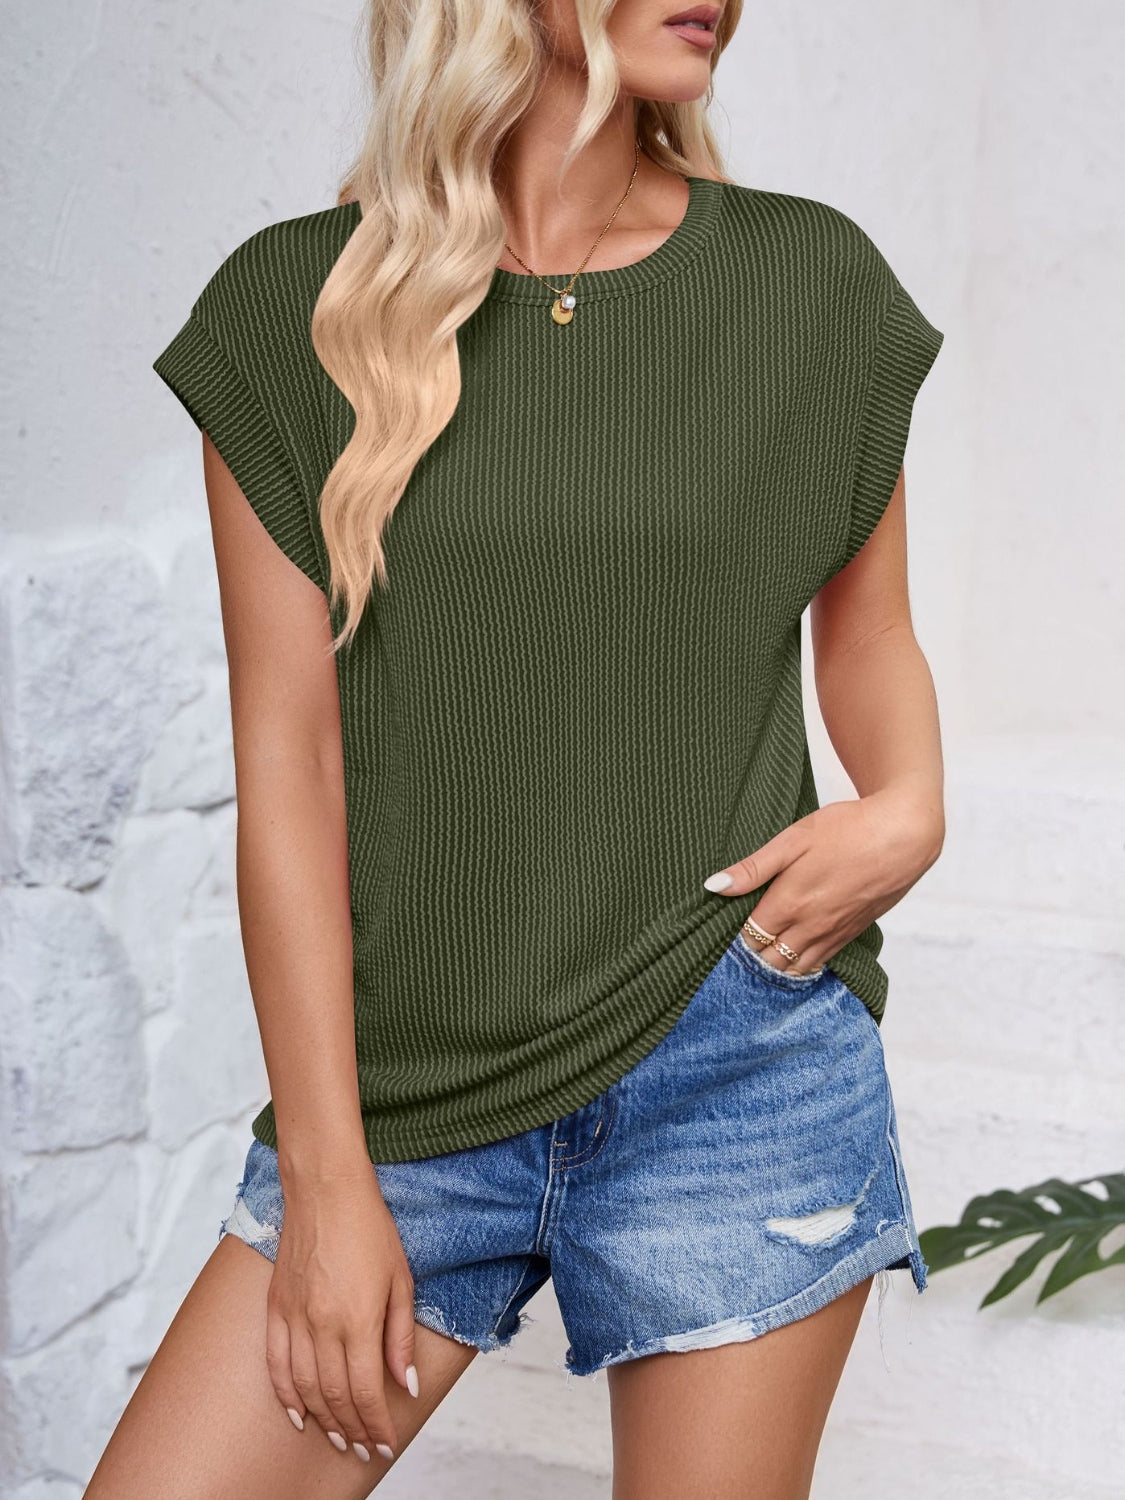 One At A Time Textured Top